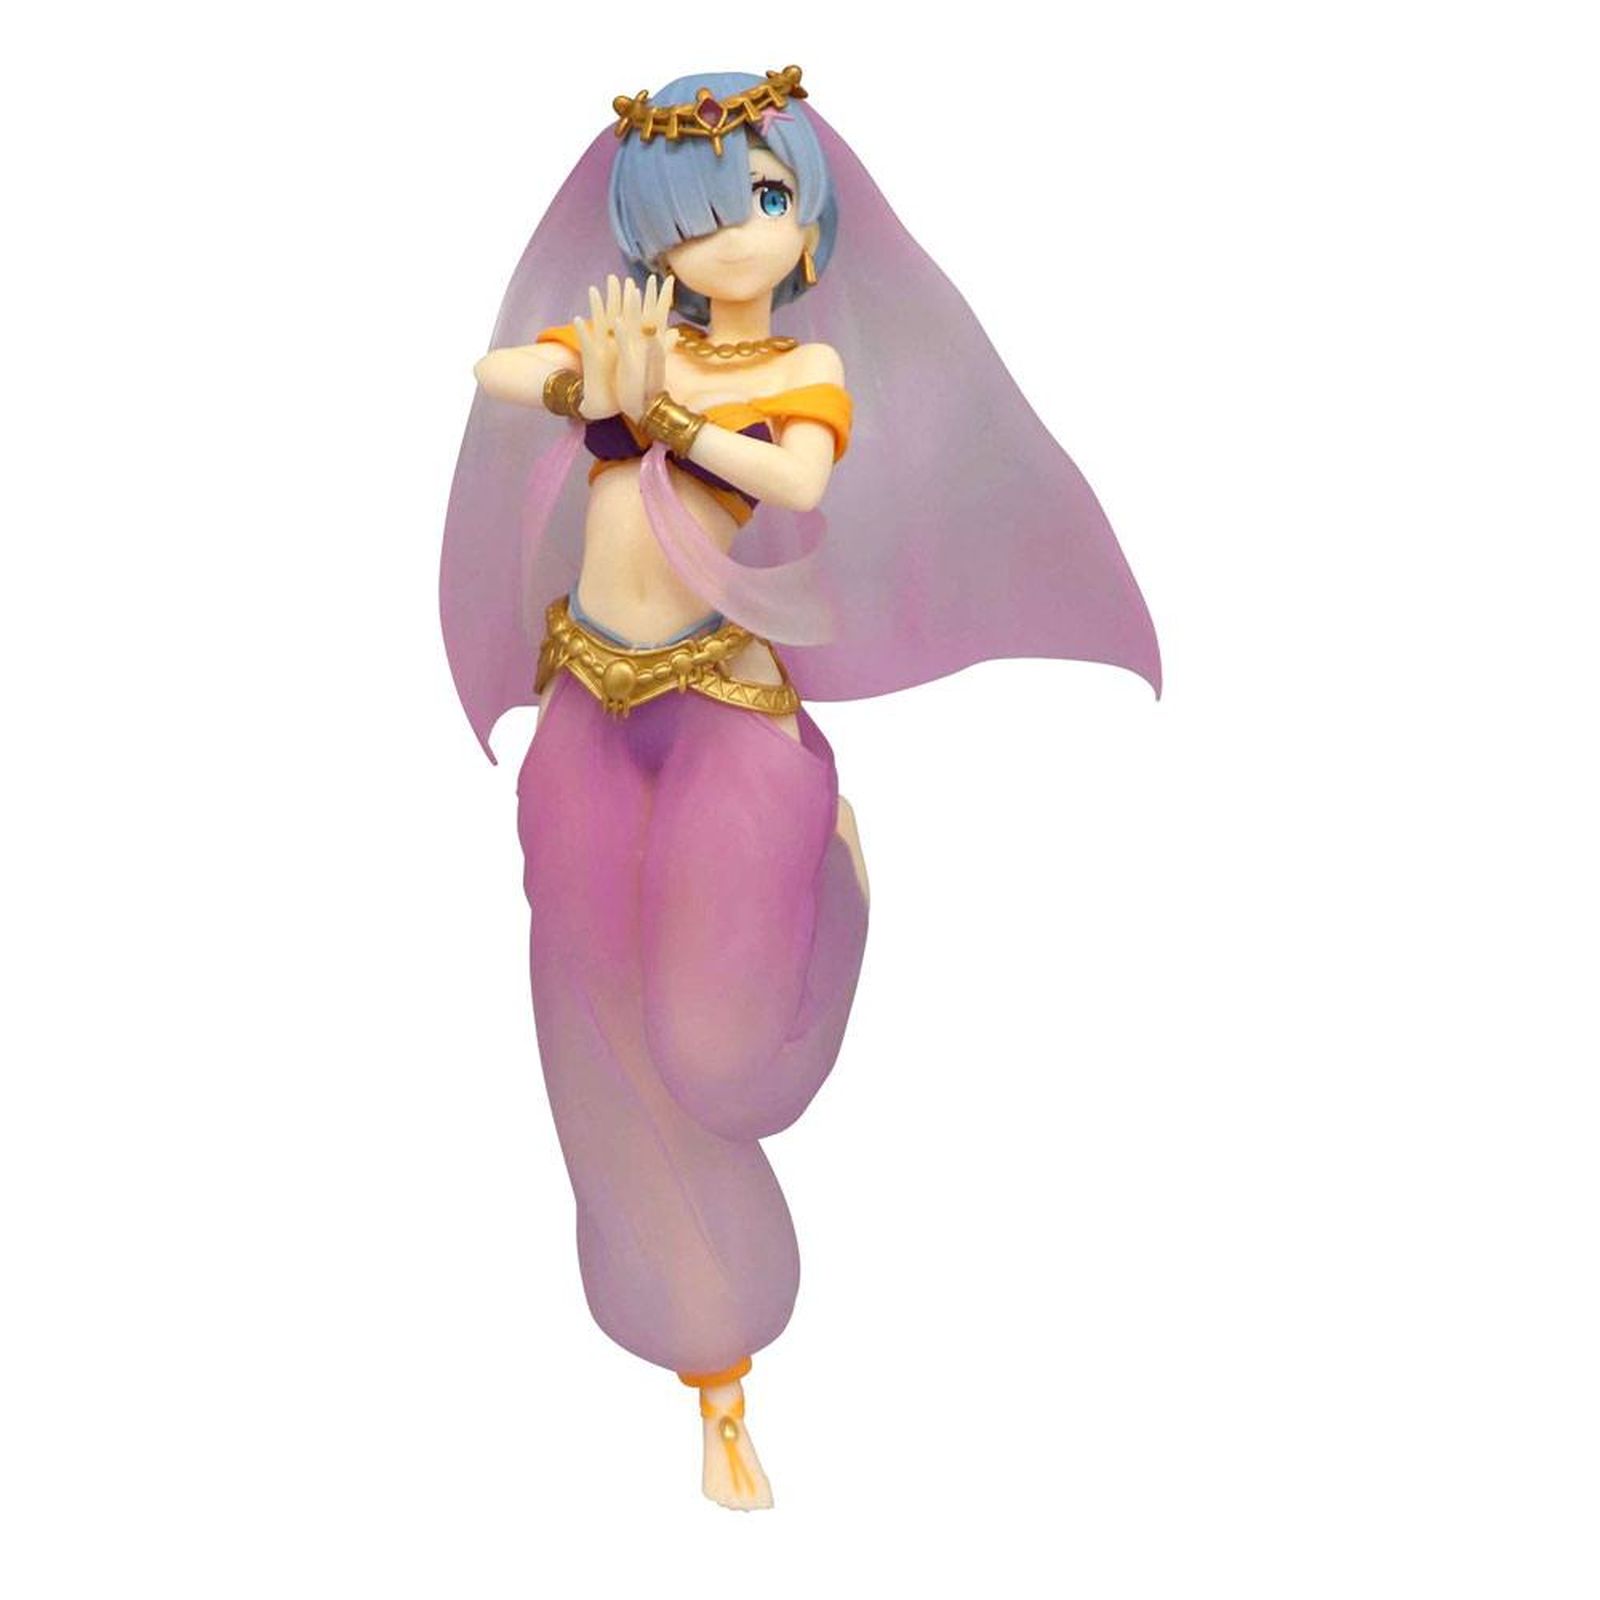 REM IN ARABIAN NIGHTS 7 ANOTHER COLOR VER FIG 21 CM RE: ZERO SLIAW SSS FIGURE